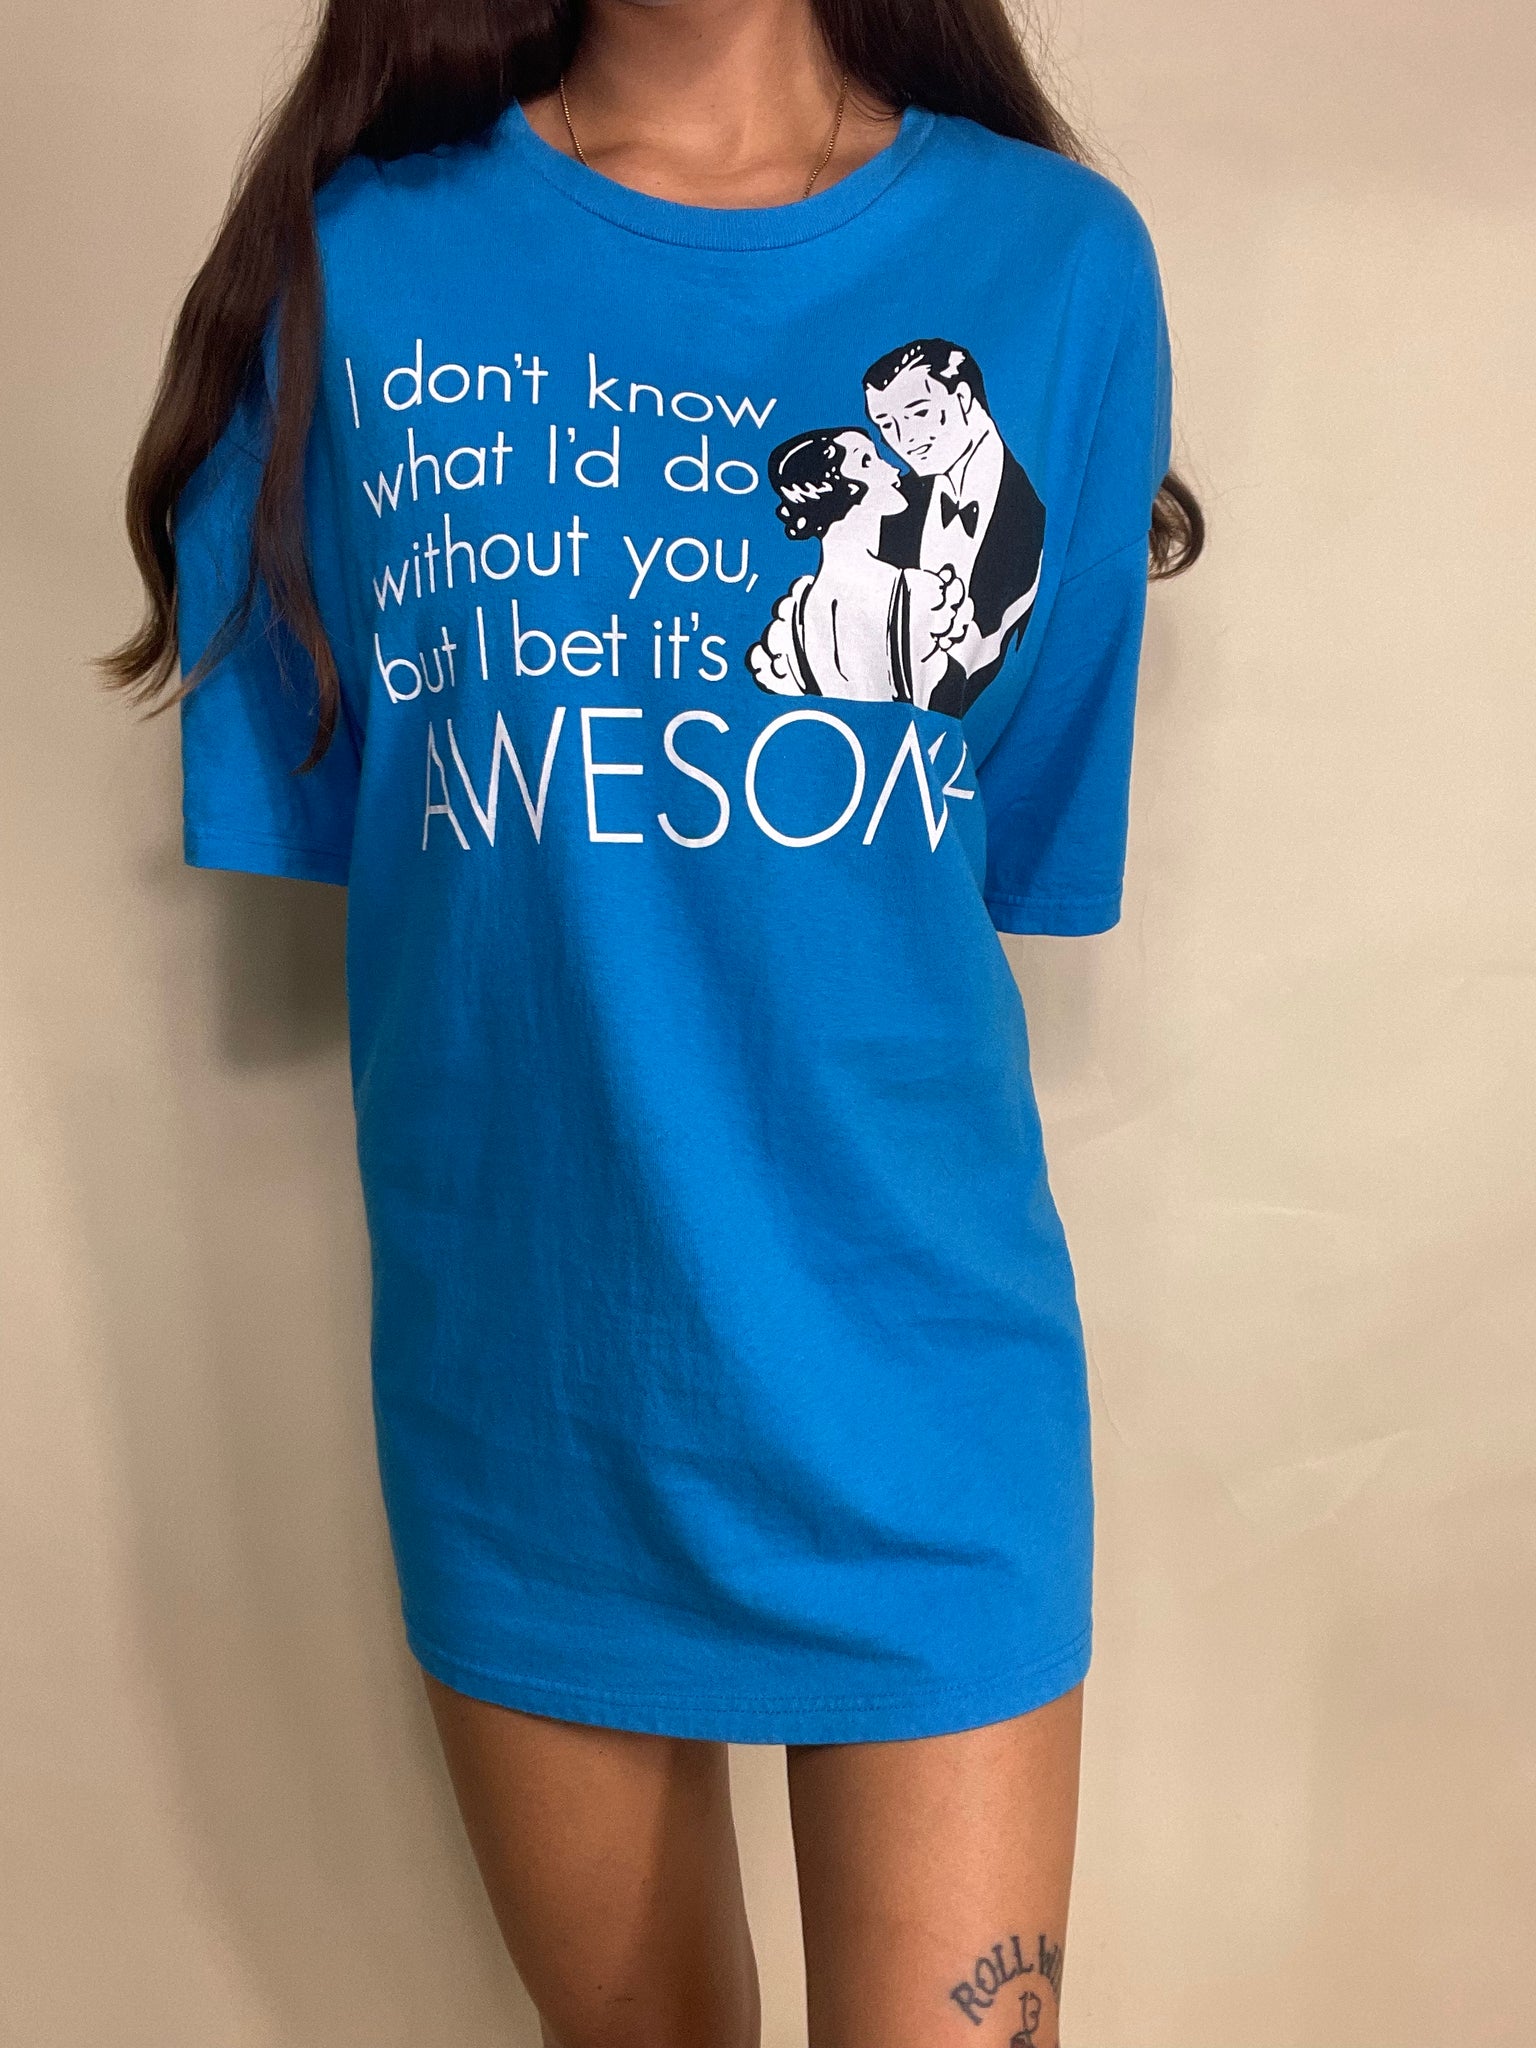 Funny graphic tee, Size XXL